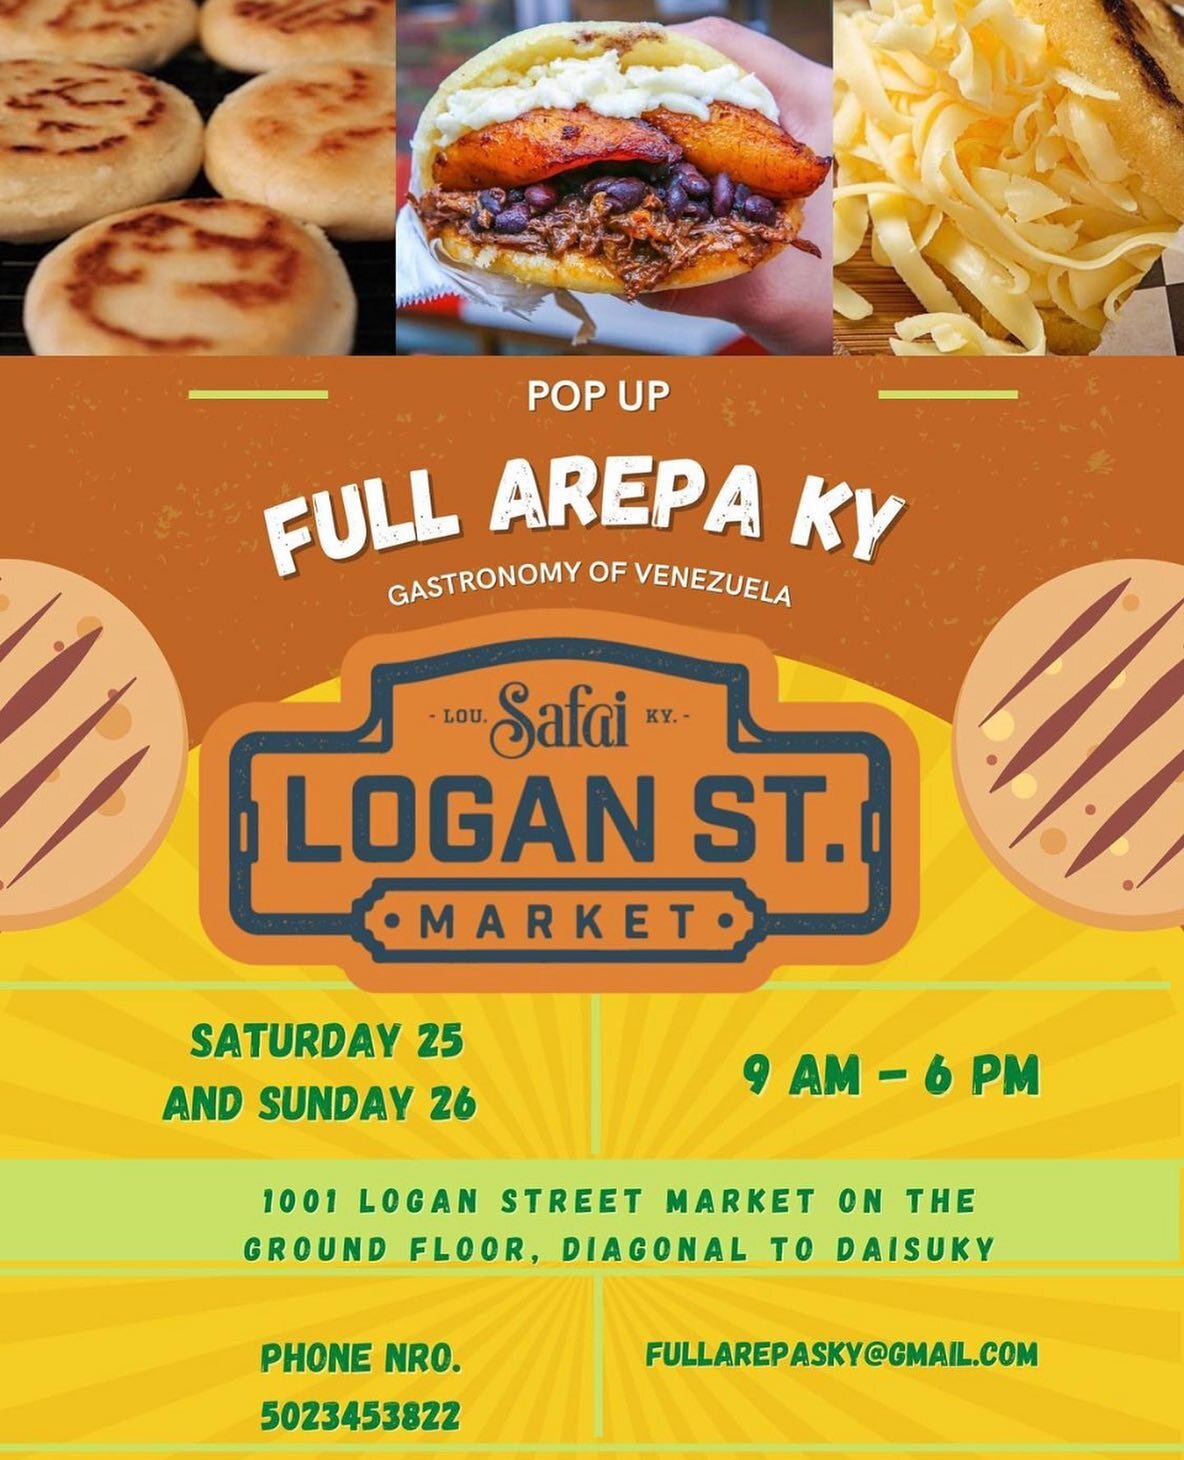 @fullarepaky pop-up has been serving up delicious arepas and more! They will be here again today, 9AM-6PM so  don&rsquo;t miss out!

Make time to shop around with our awesome makers and growers. 🤗

========
#Louisville #VisitLouisville #LouisvilleFo